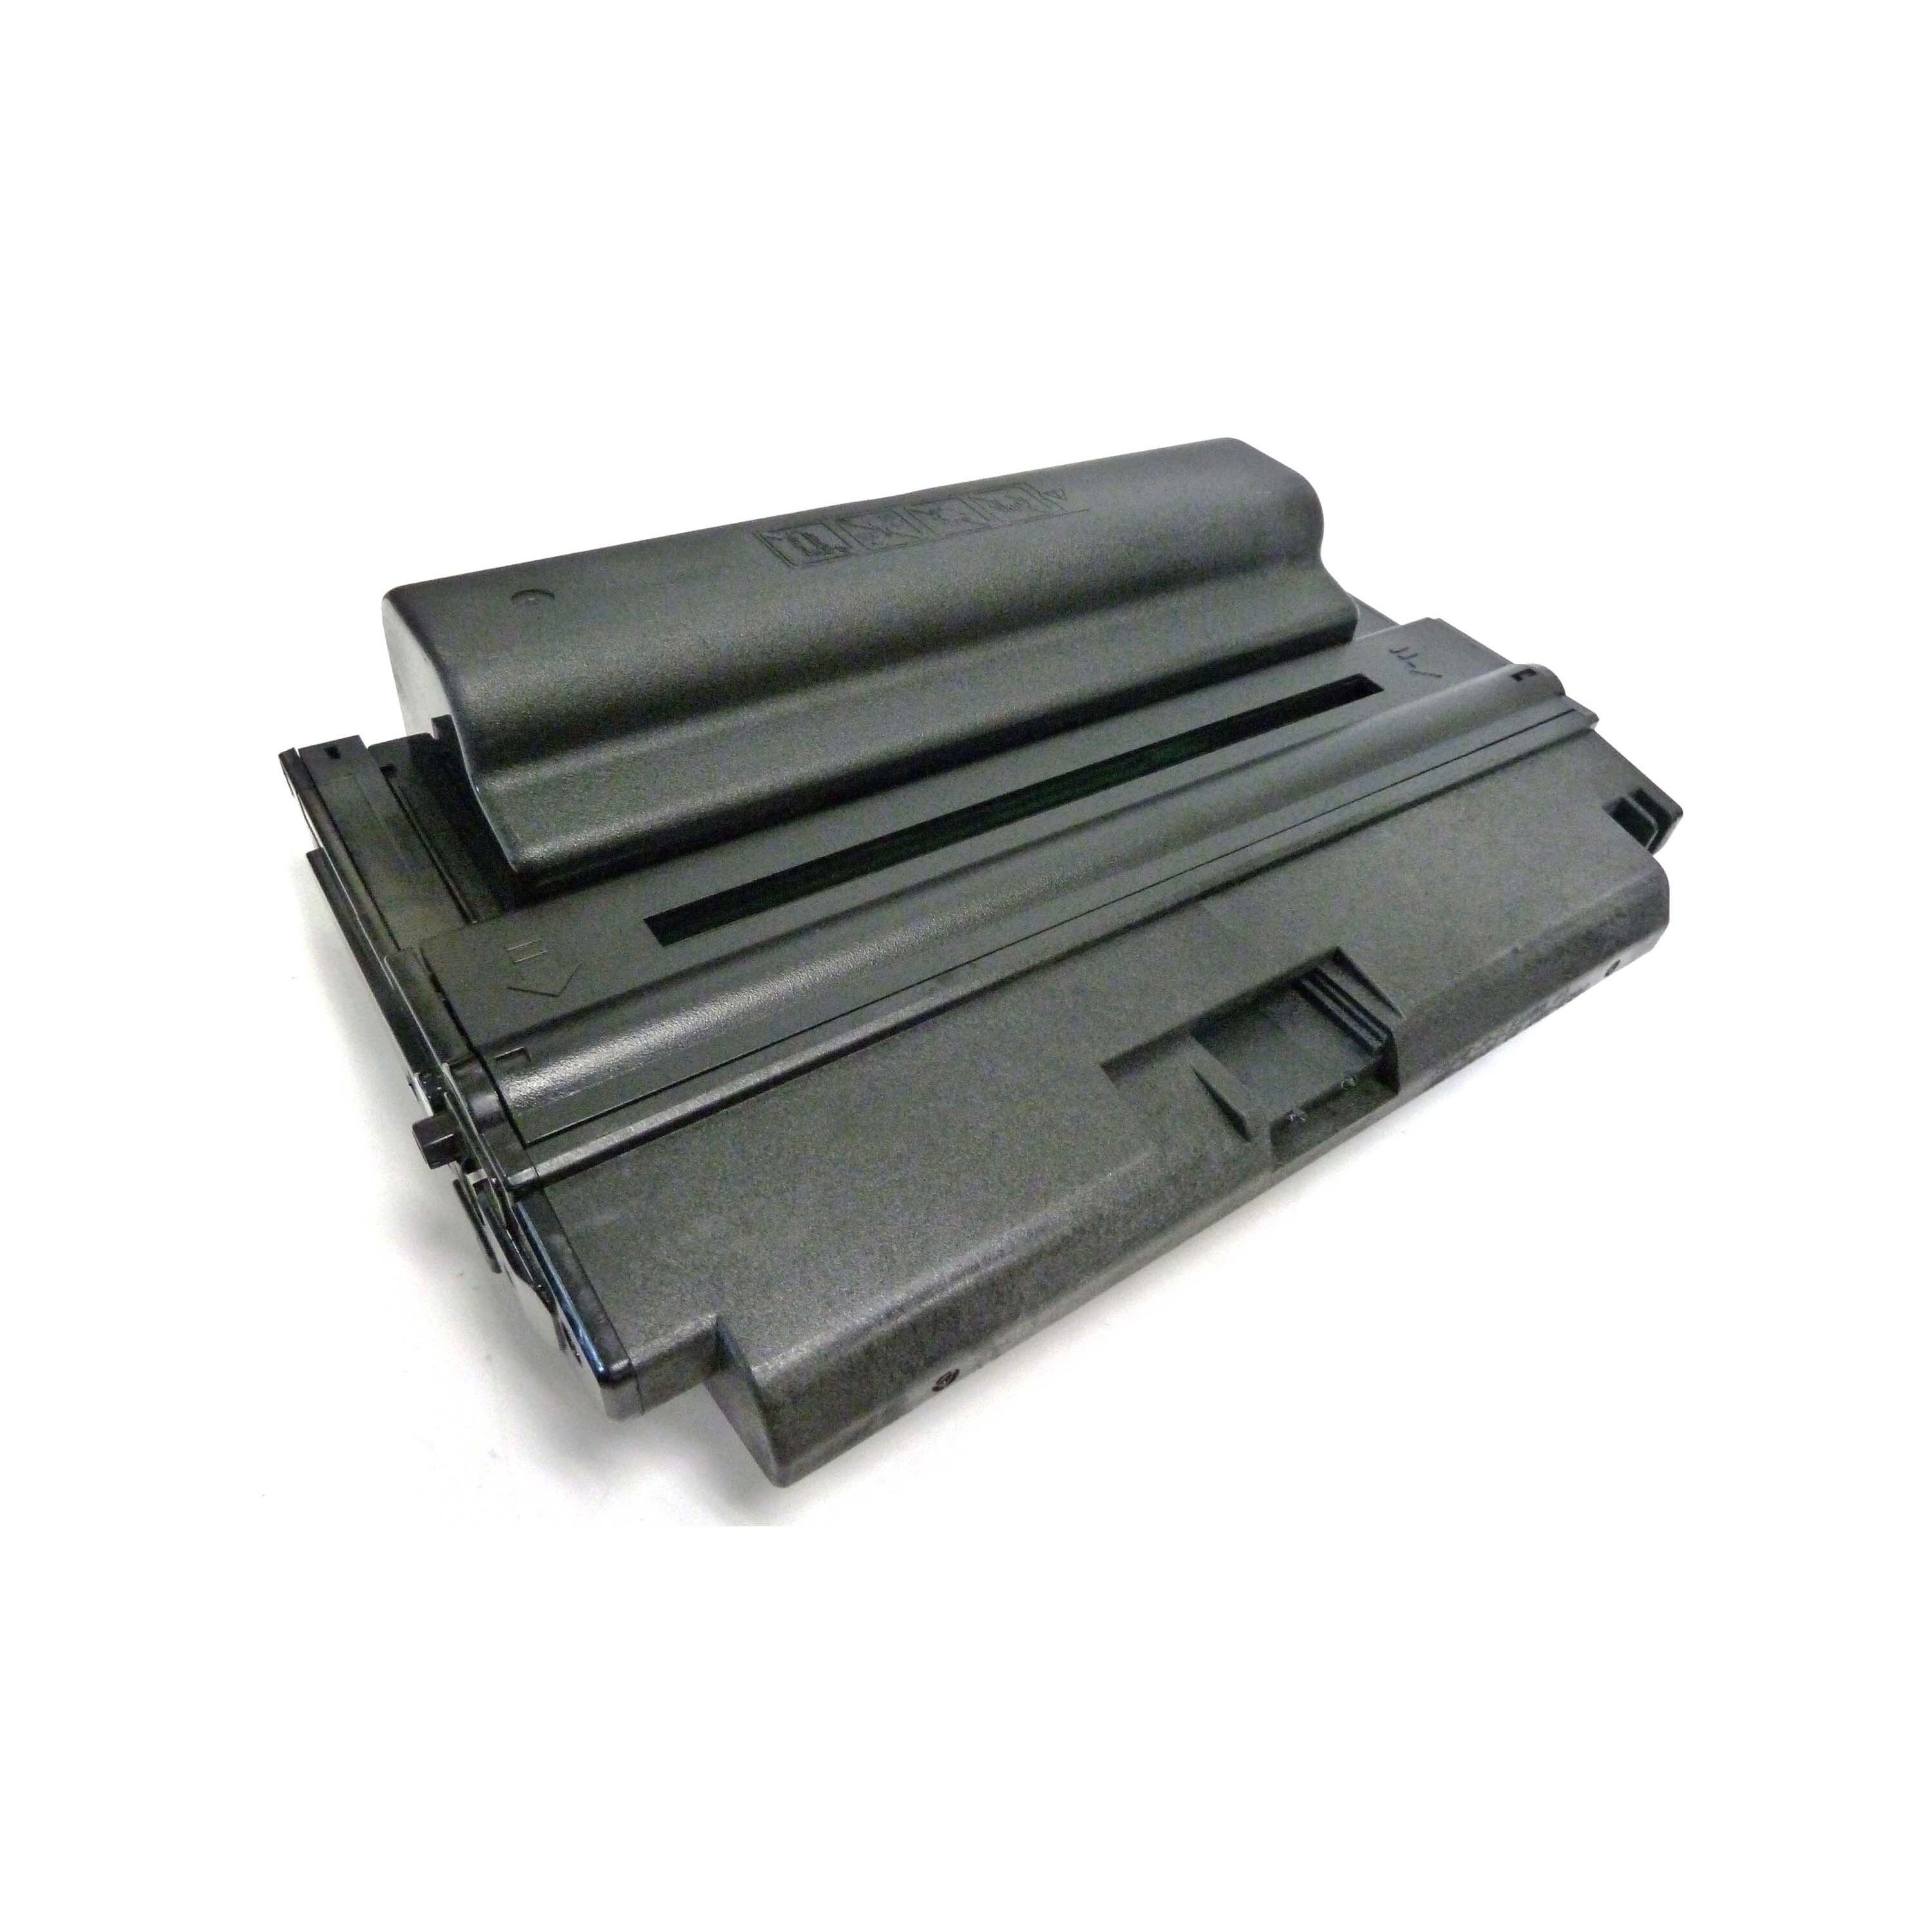 (pack Of 3) Compatible Xerox 108r00795 Toner Cartridge For Xerox Phaser 3635mfp Printer